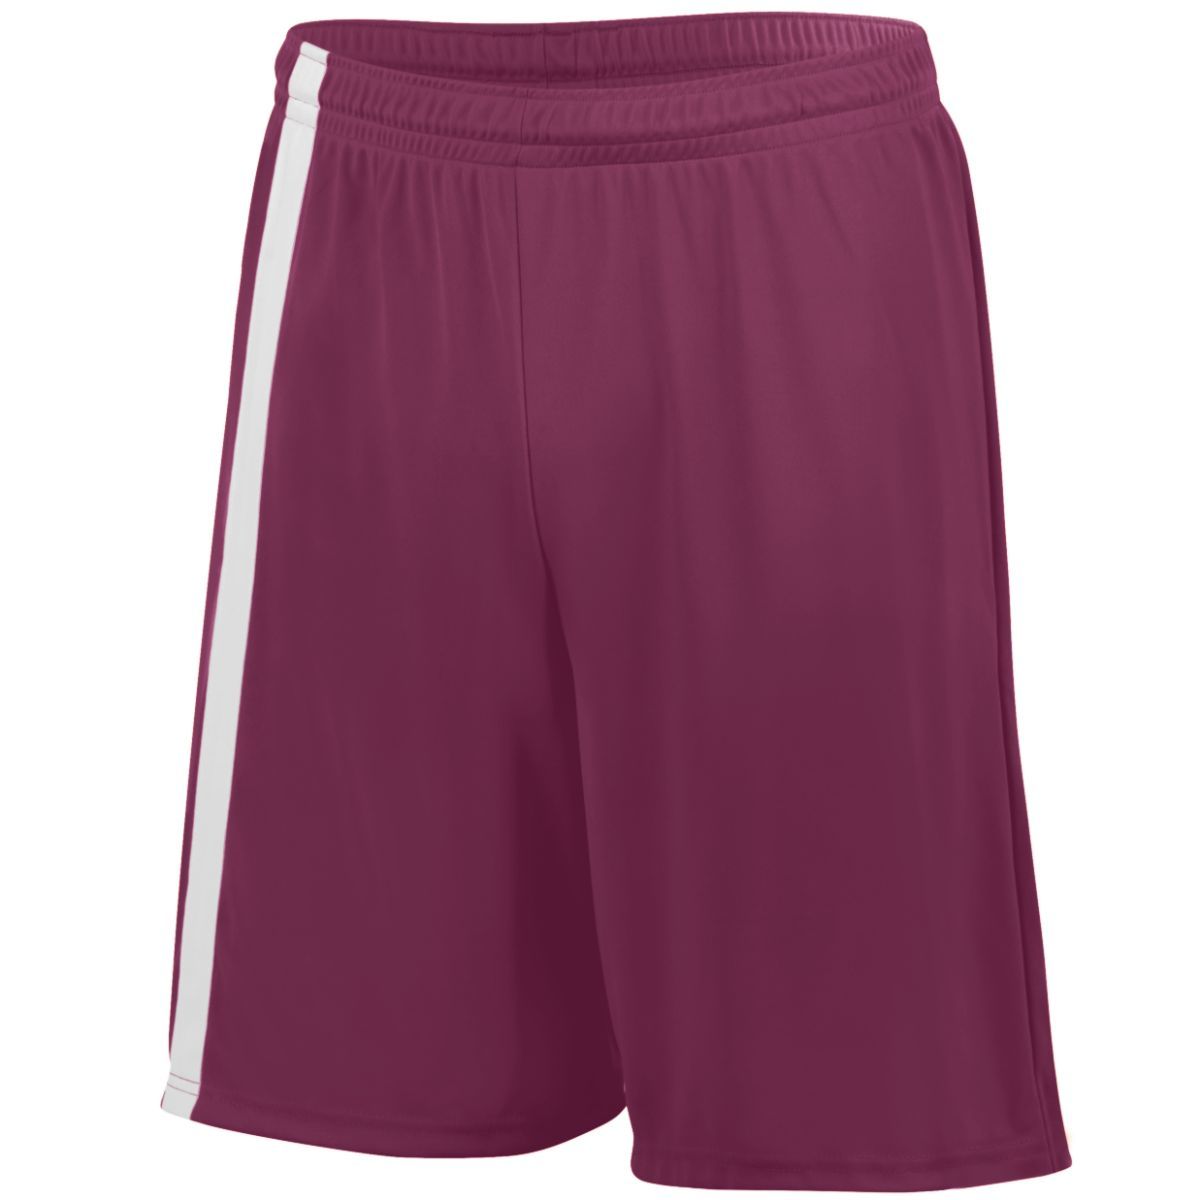 Augusta Sportswear Youth Attacking Third Shorts in Maroon/White  -Part of the Youth, Youth-Shorts, Augusta-Products, Soccer, All-Sports-1 product lines at KanaleyCreations.com